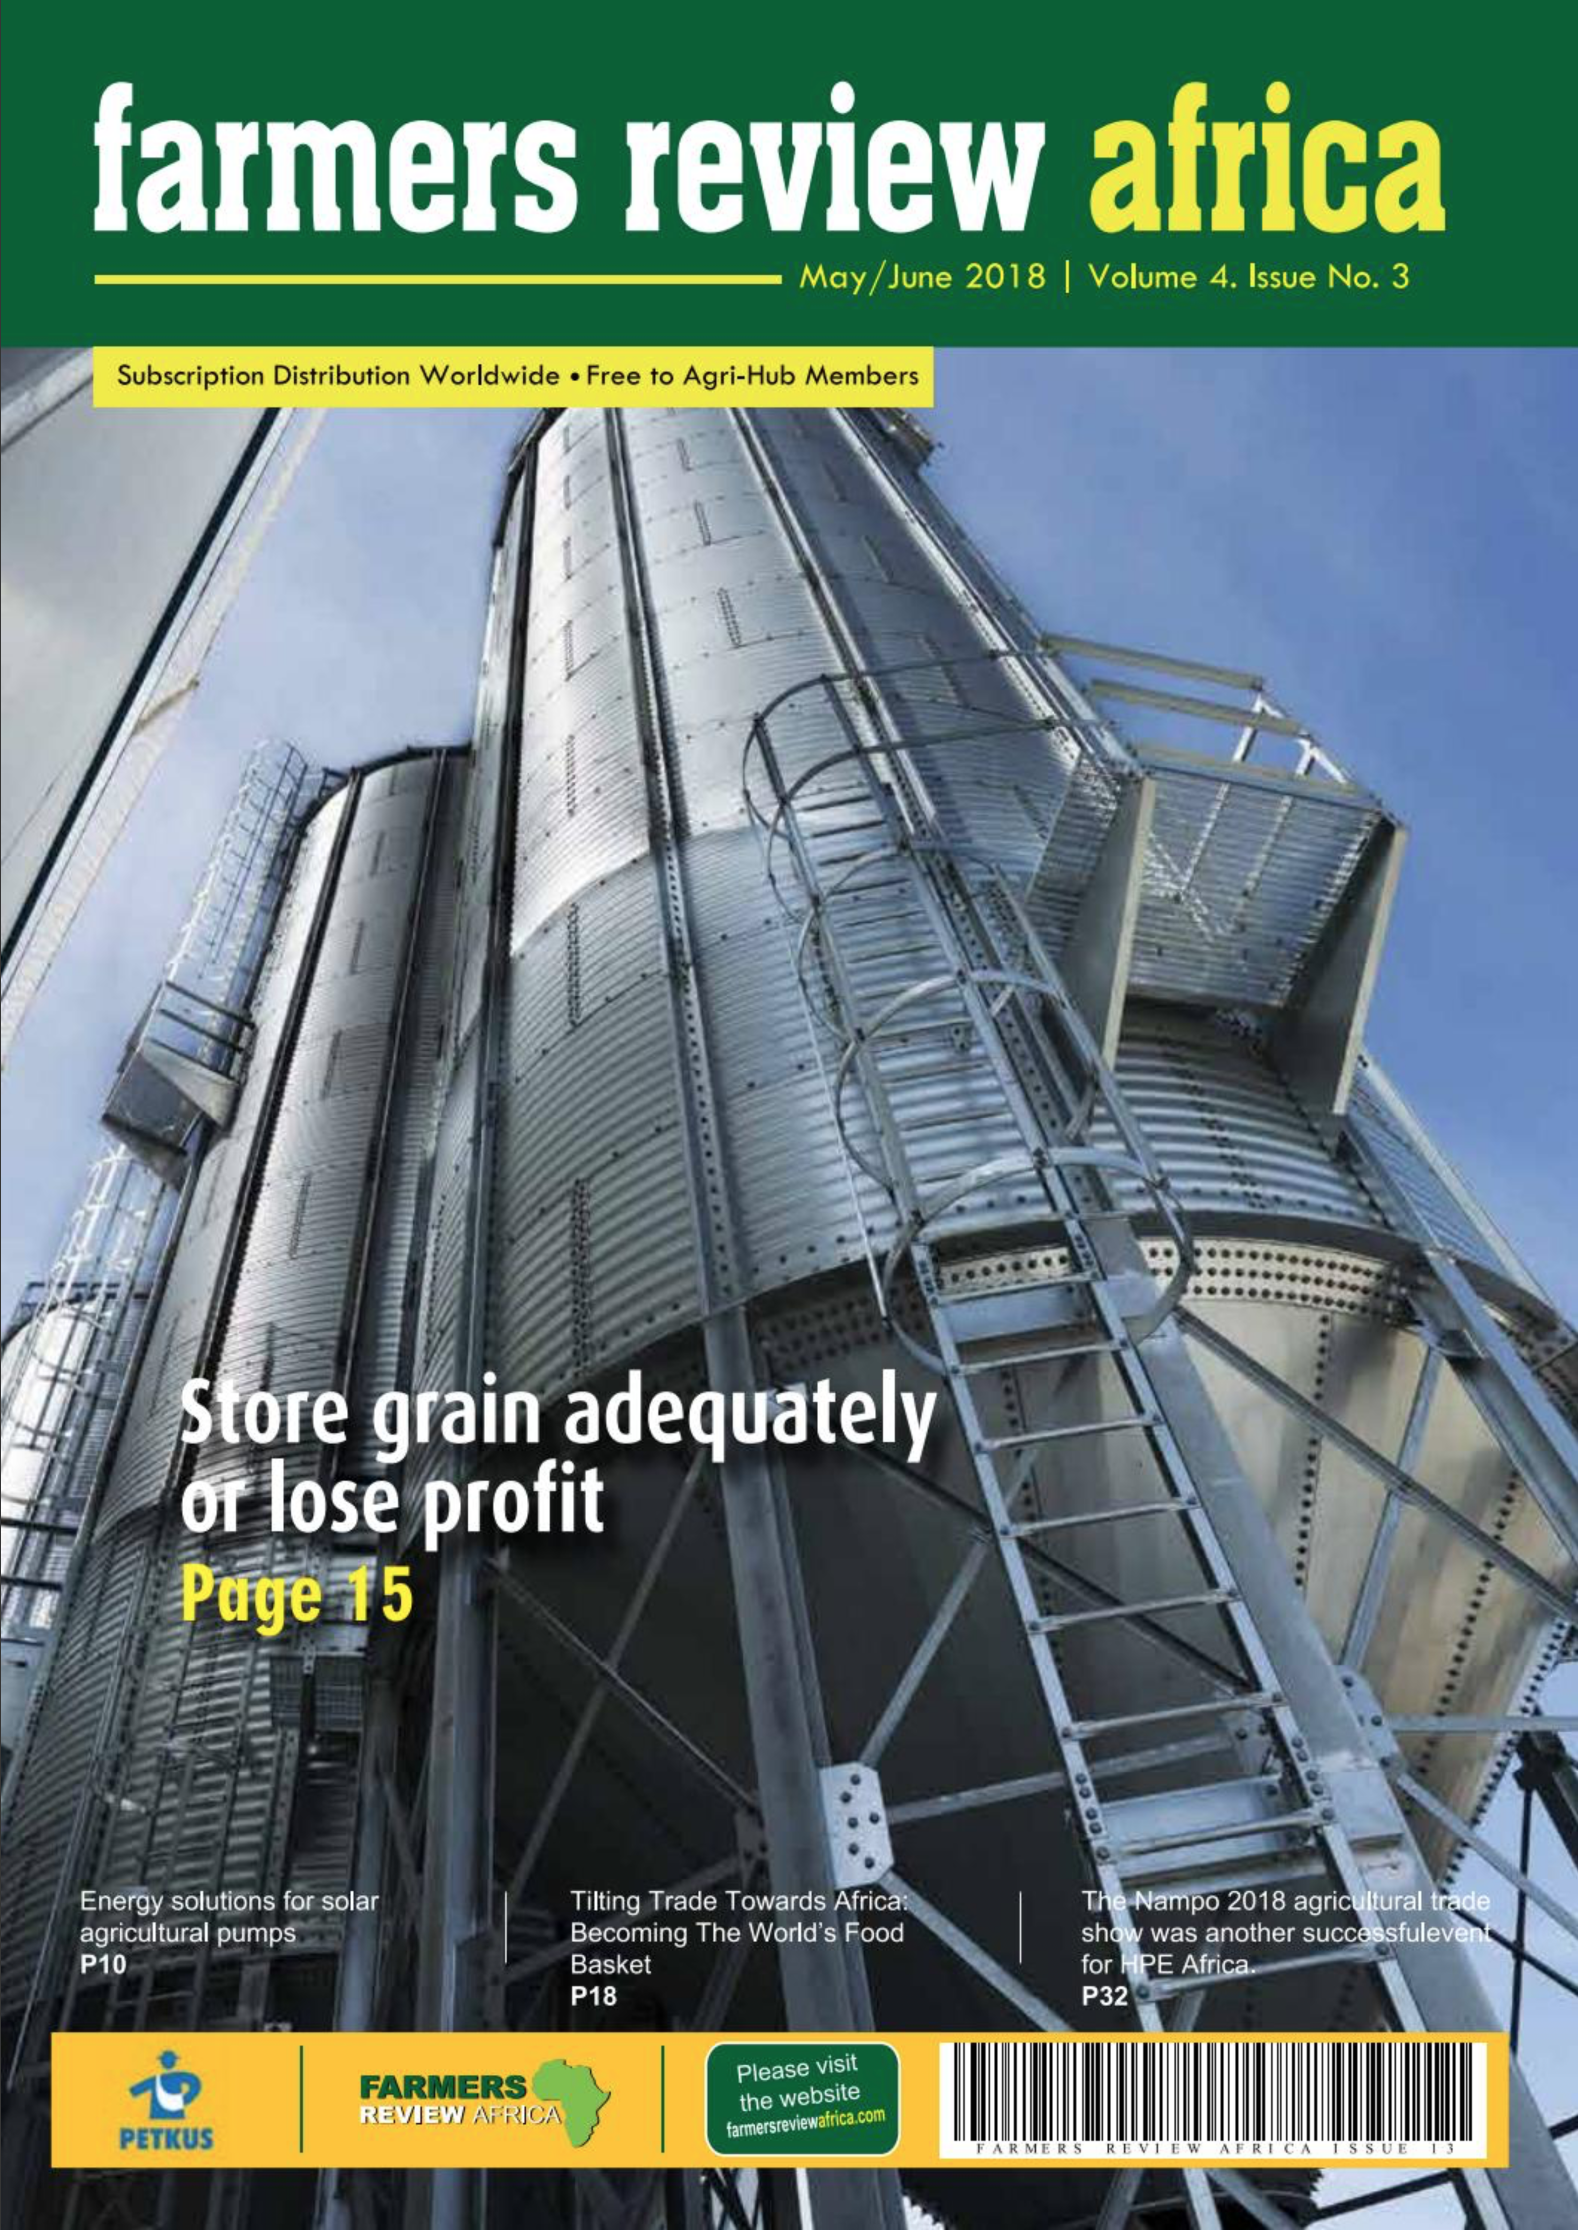 SIMEZA is cover in Farmers Review Africa